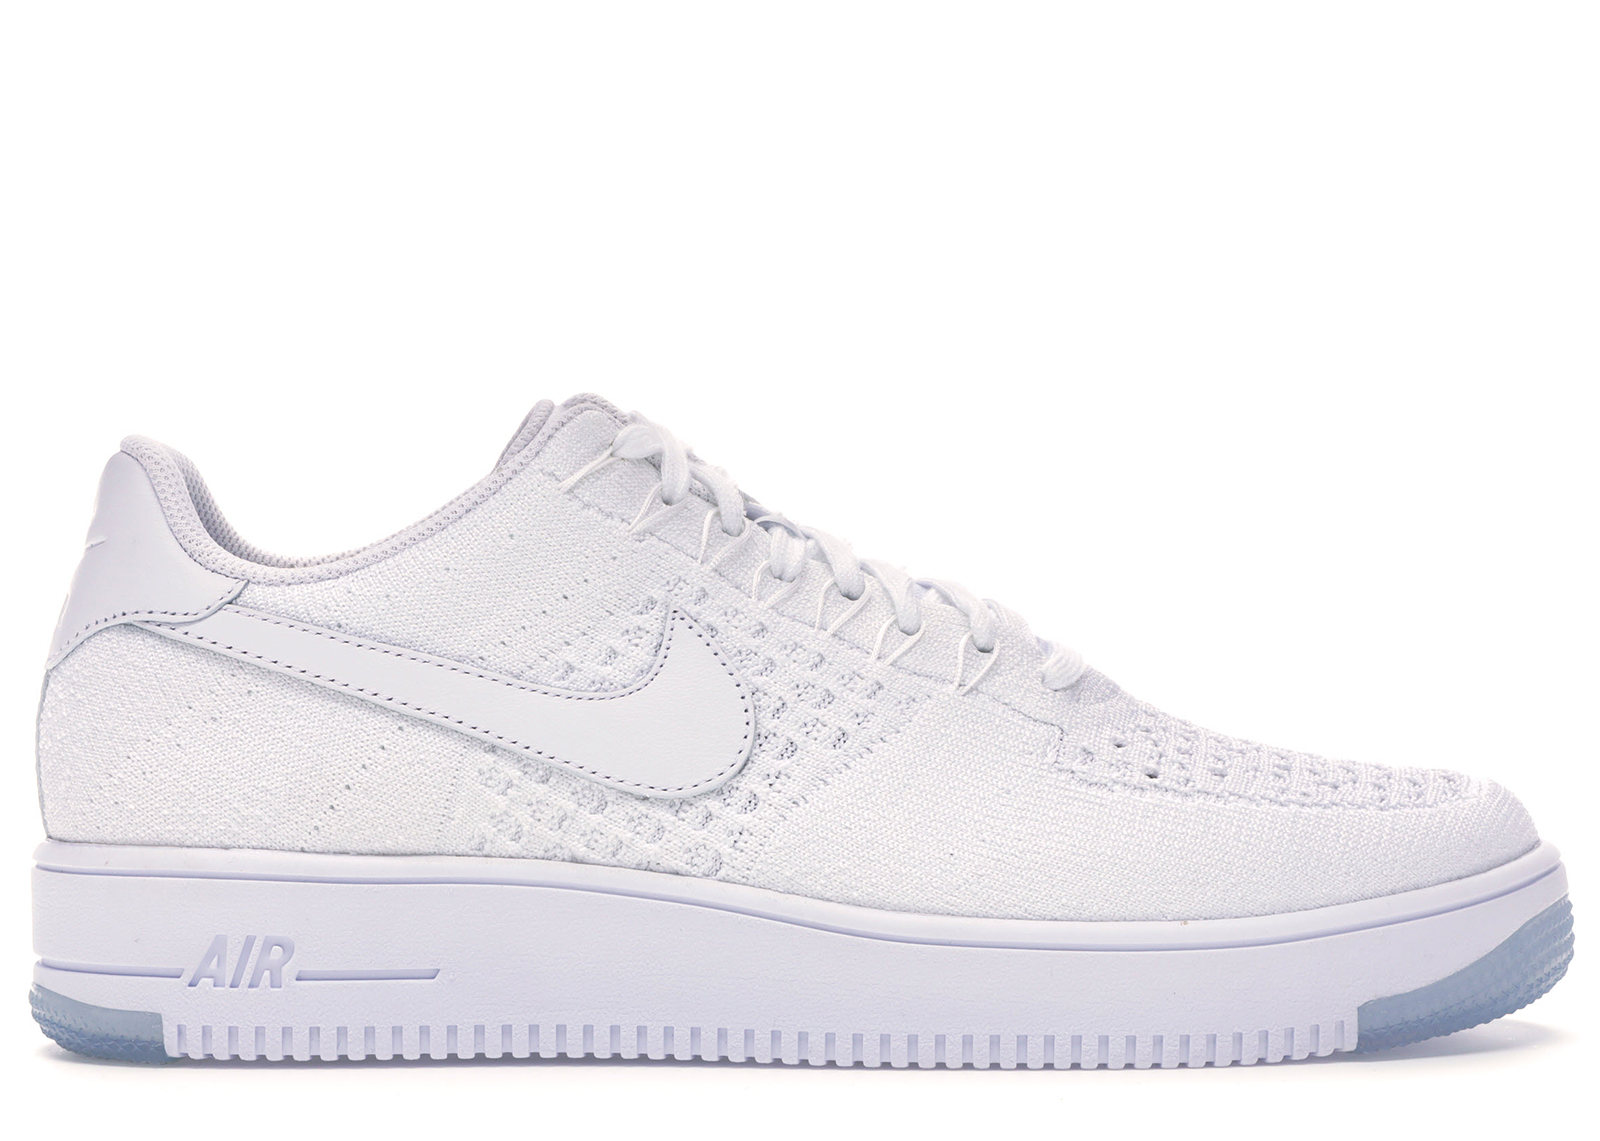 Nike Af1 Ultra Flyknit Low White/White-Ice Men's - 817419-100 - US